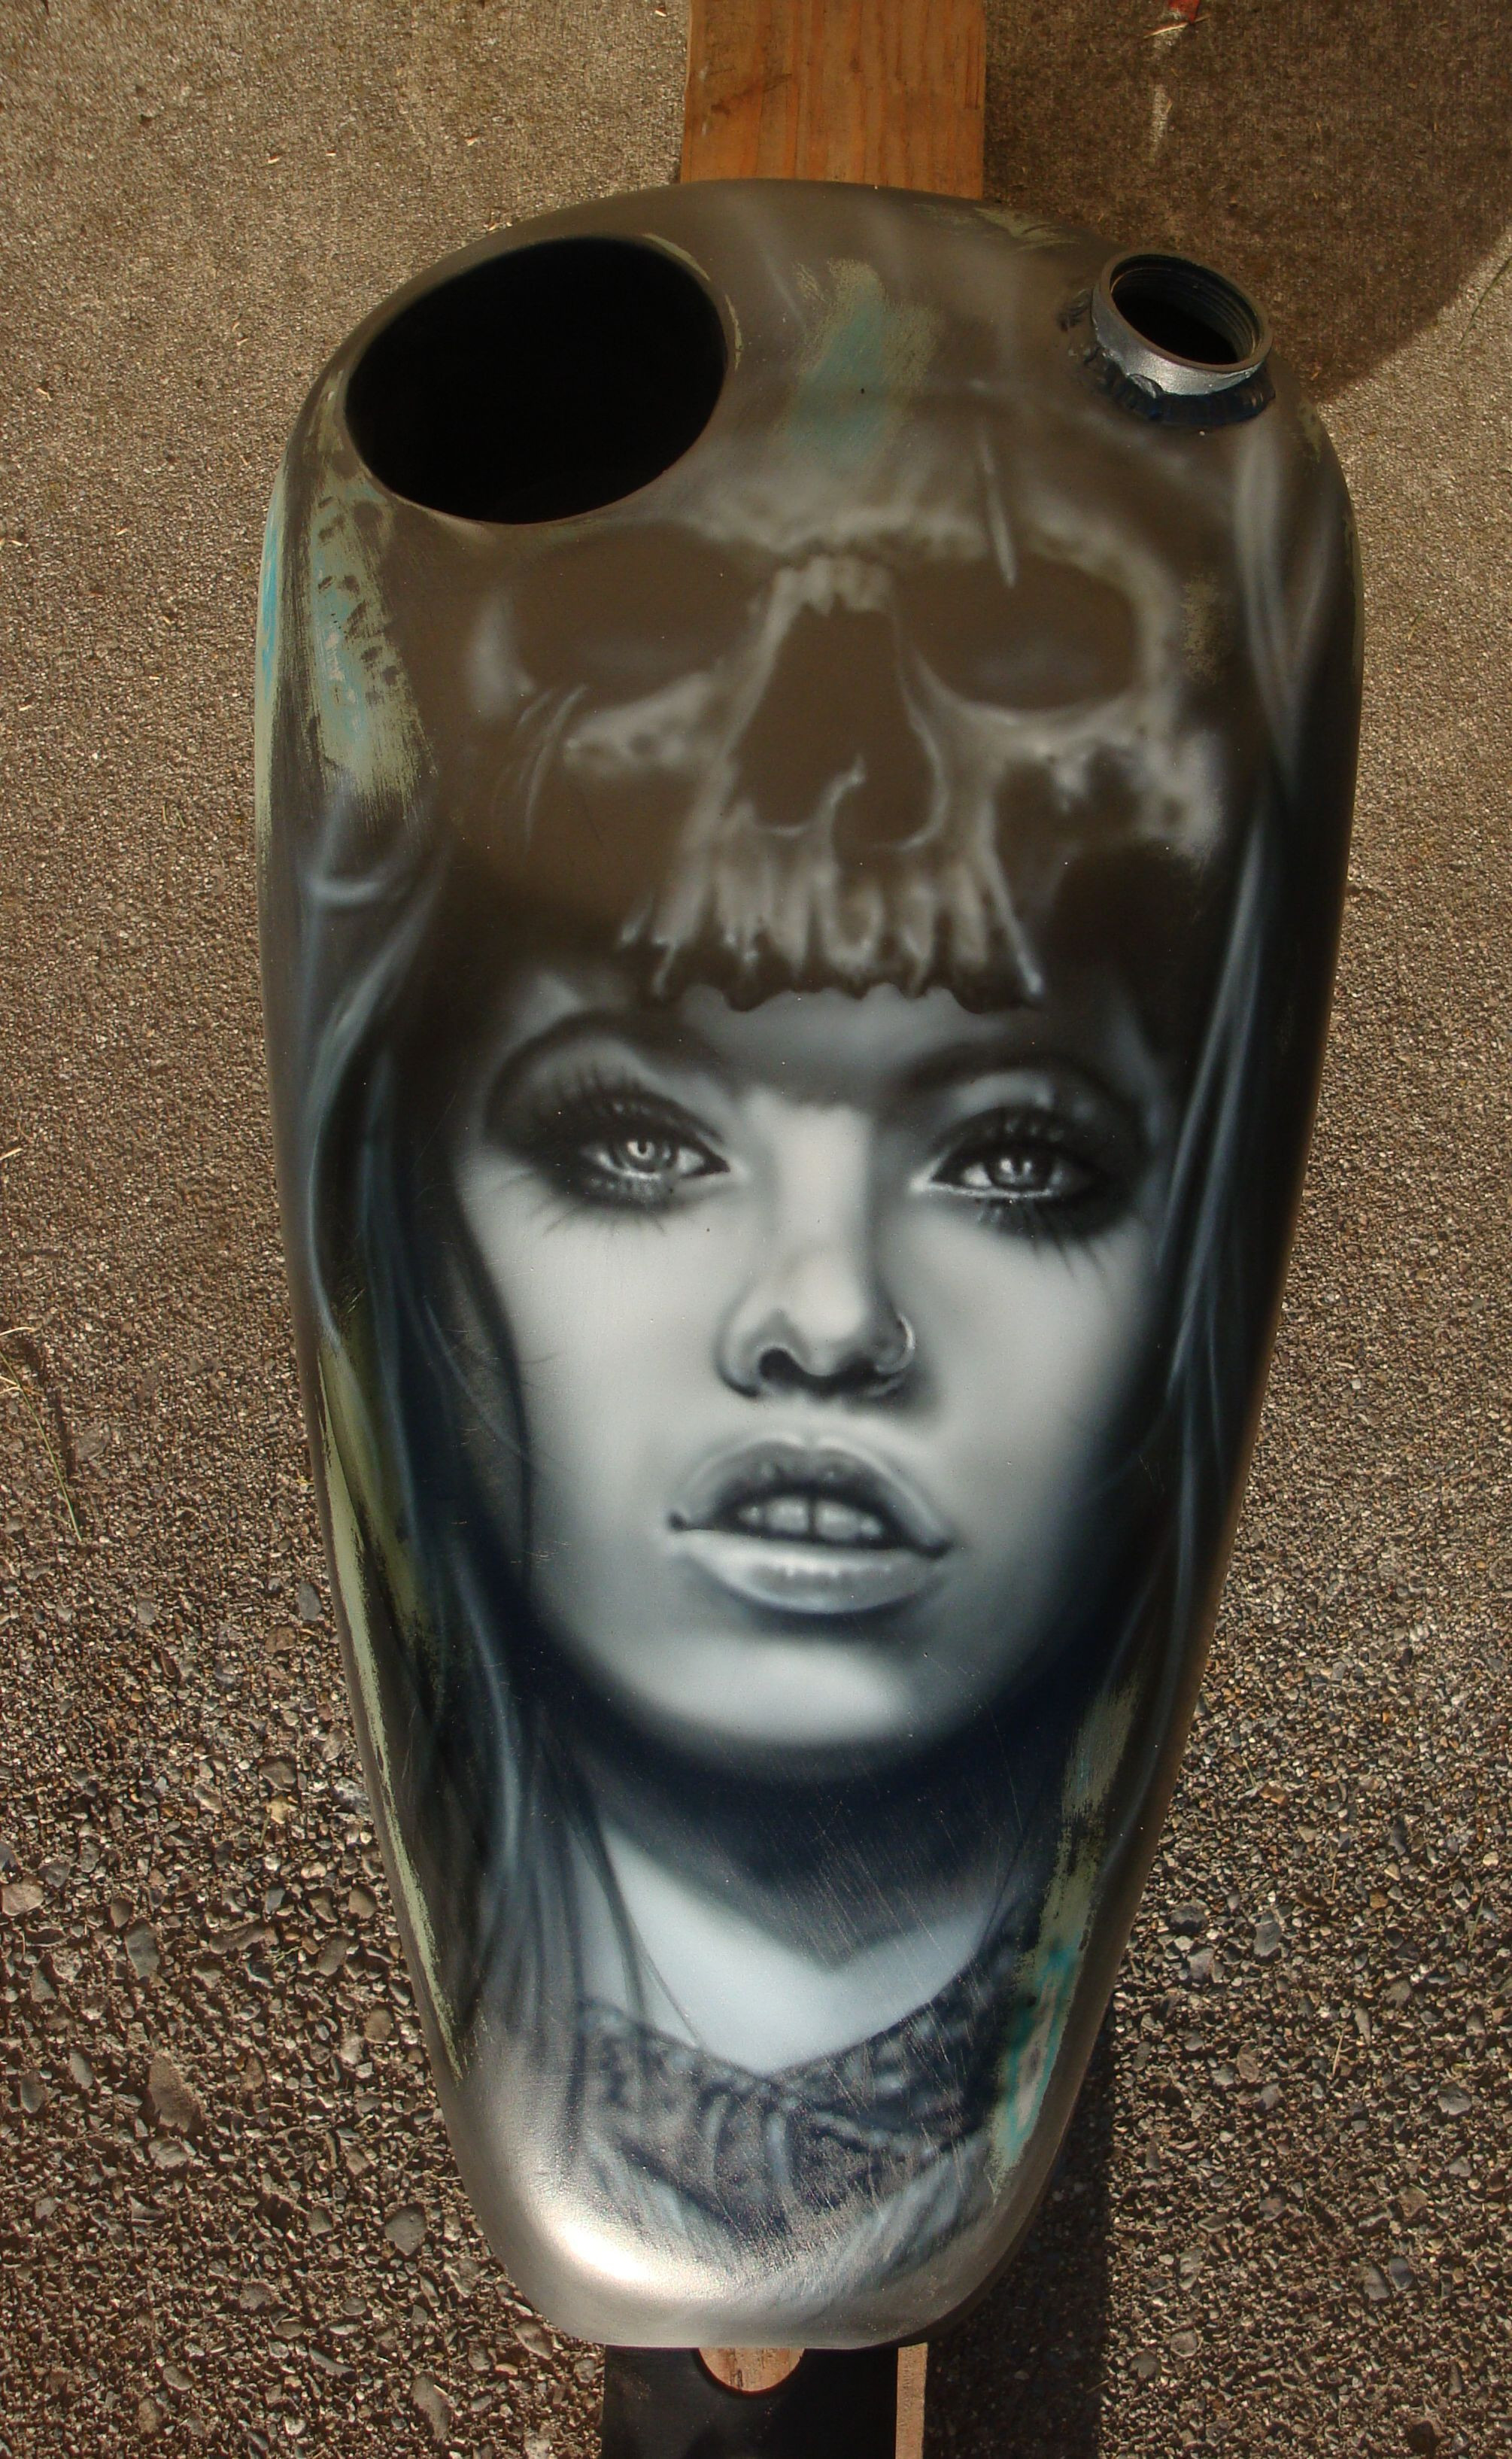 26 Fabulous Face Vases for Sale 2024 free download face vases for sale of free hand airbrush hot chick with skull face on a sportster peanut regarding free hand airbrush hot chick with skull face on a sportster peanut tank i fabricated with 